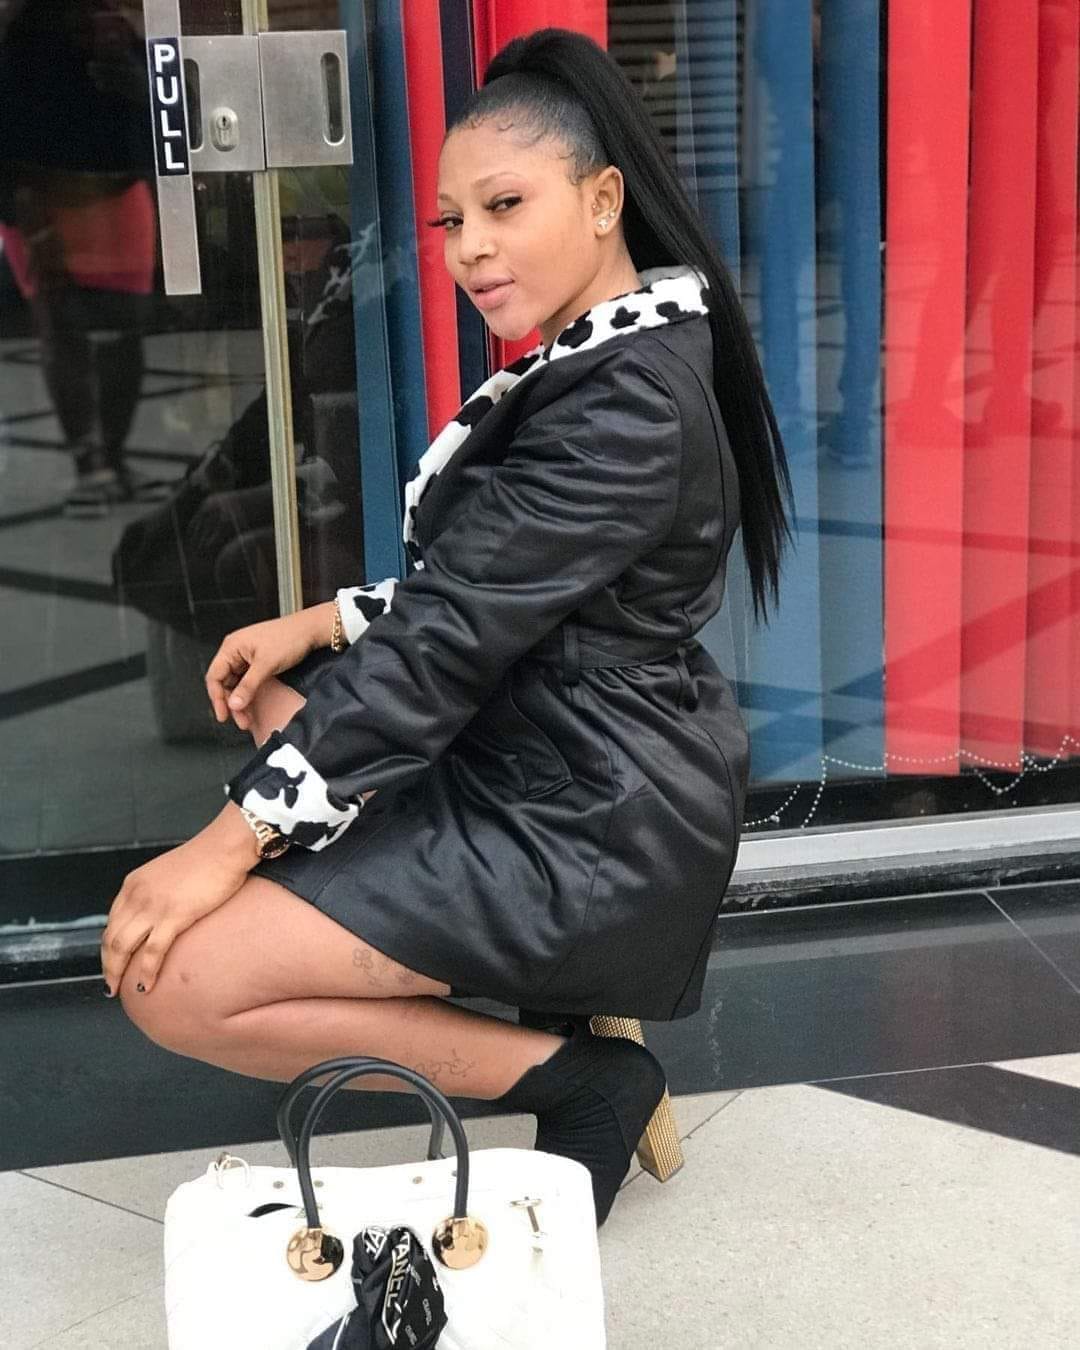 Nigerian businesswoman Amelia Pounds dies during liposuction surgery in India [photos]